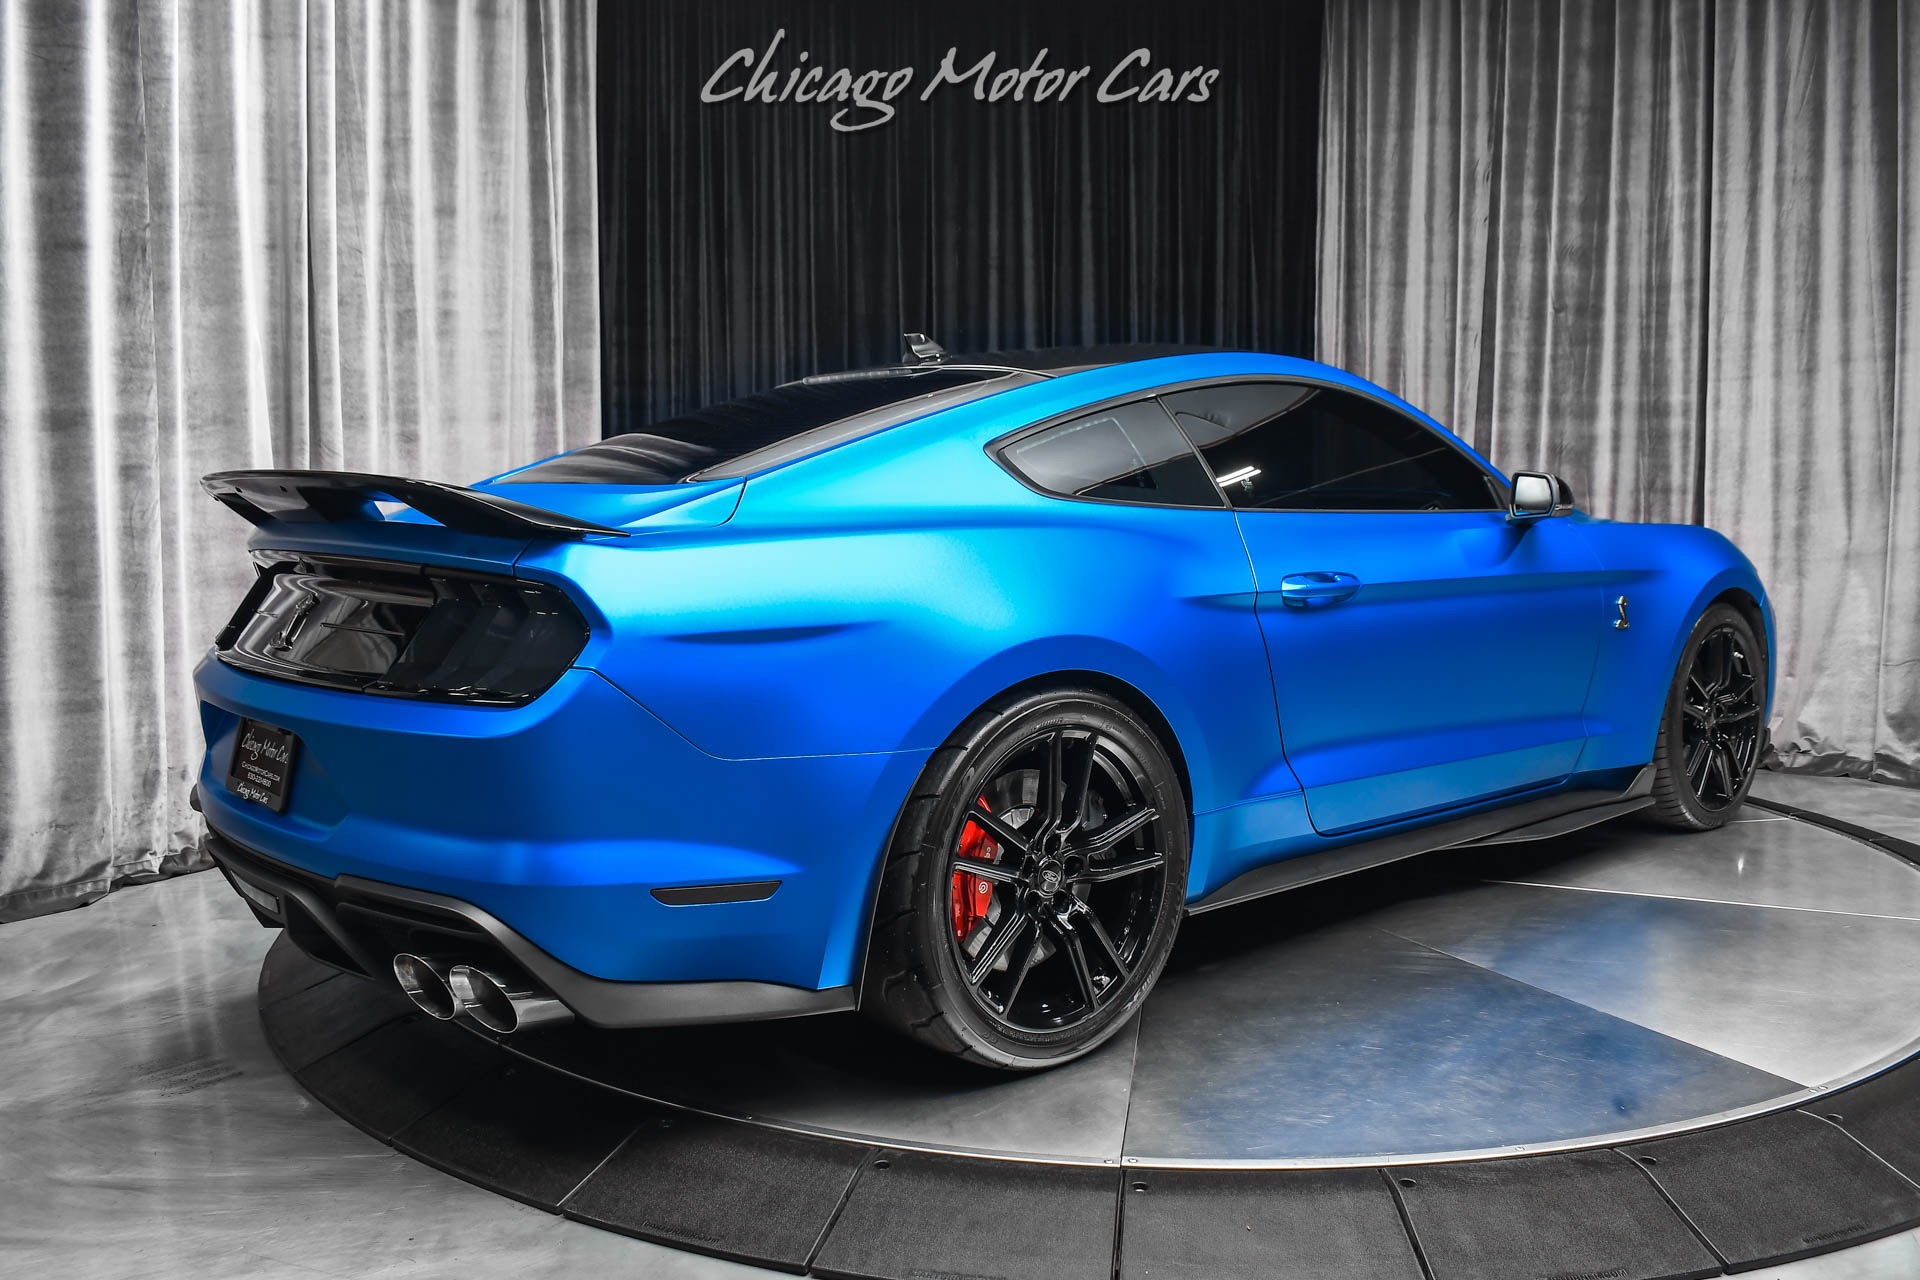 Used 2020 Ford Mustang Shelby GT500 Matte Blue Wrap! (Magnetic Grey) Tech  Pkg! Carbon! Super Clean For Sale ($77,800)